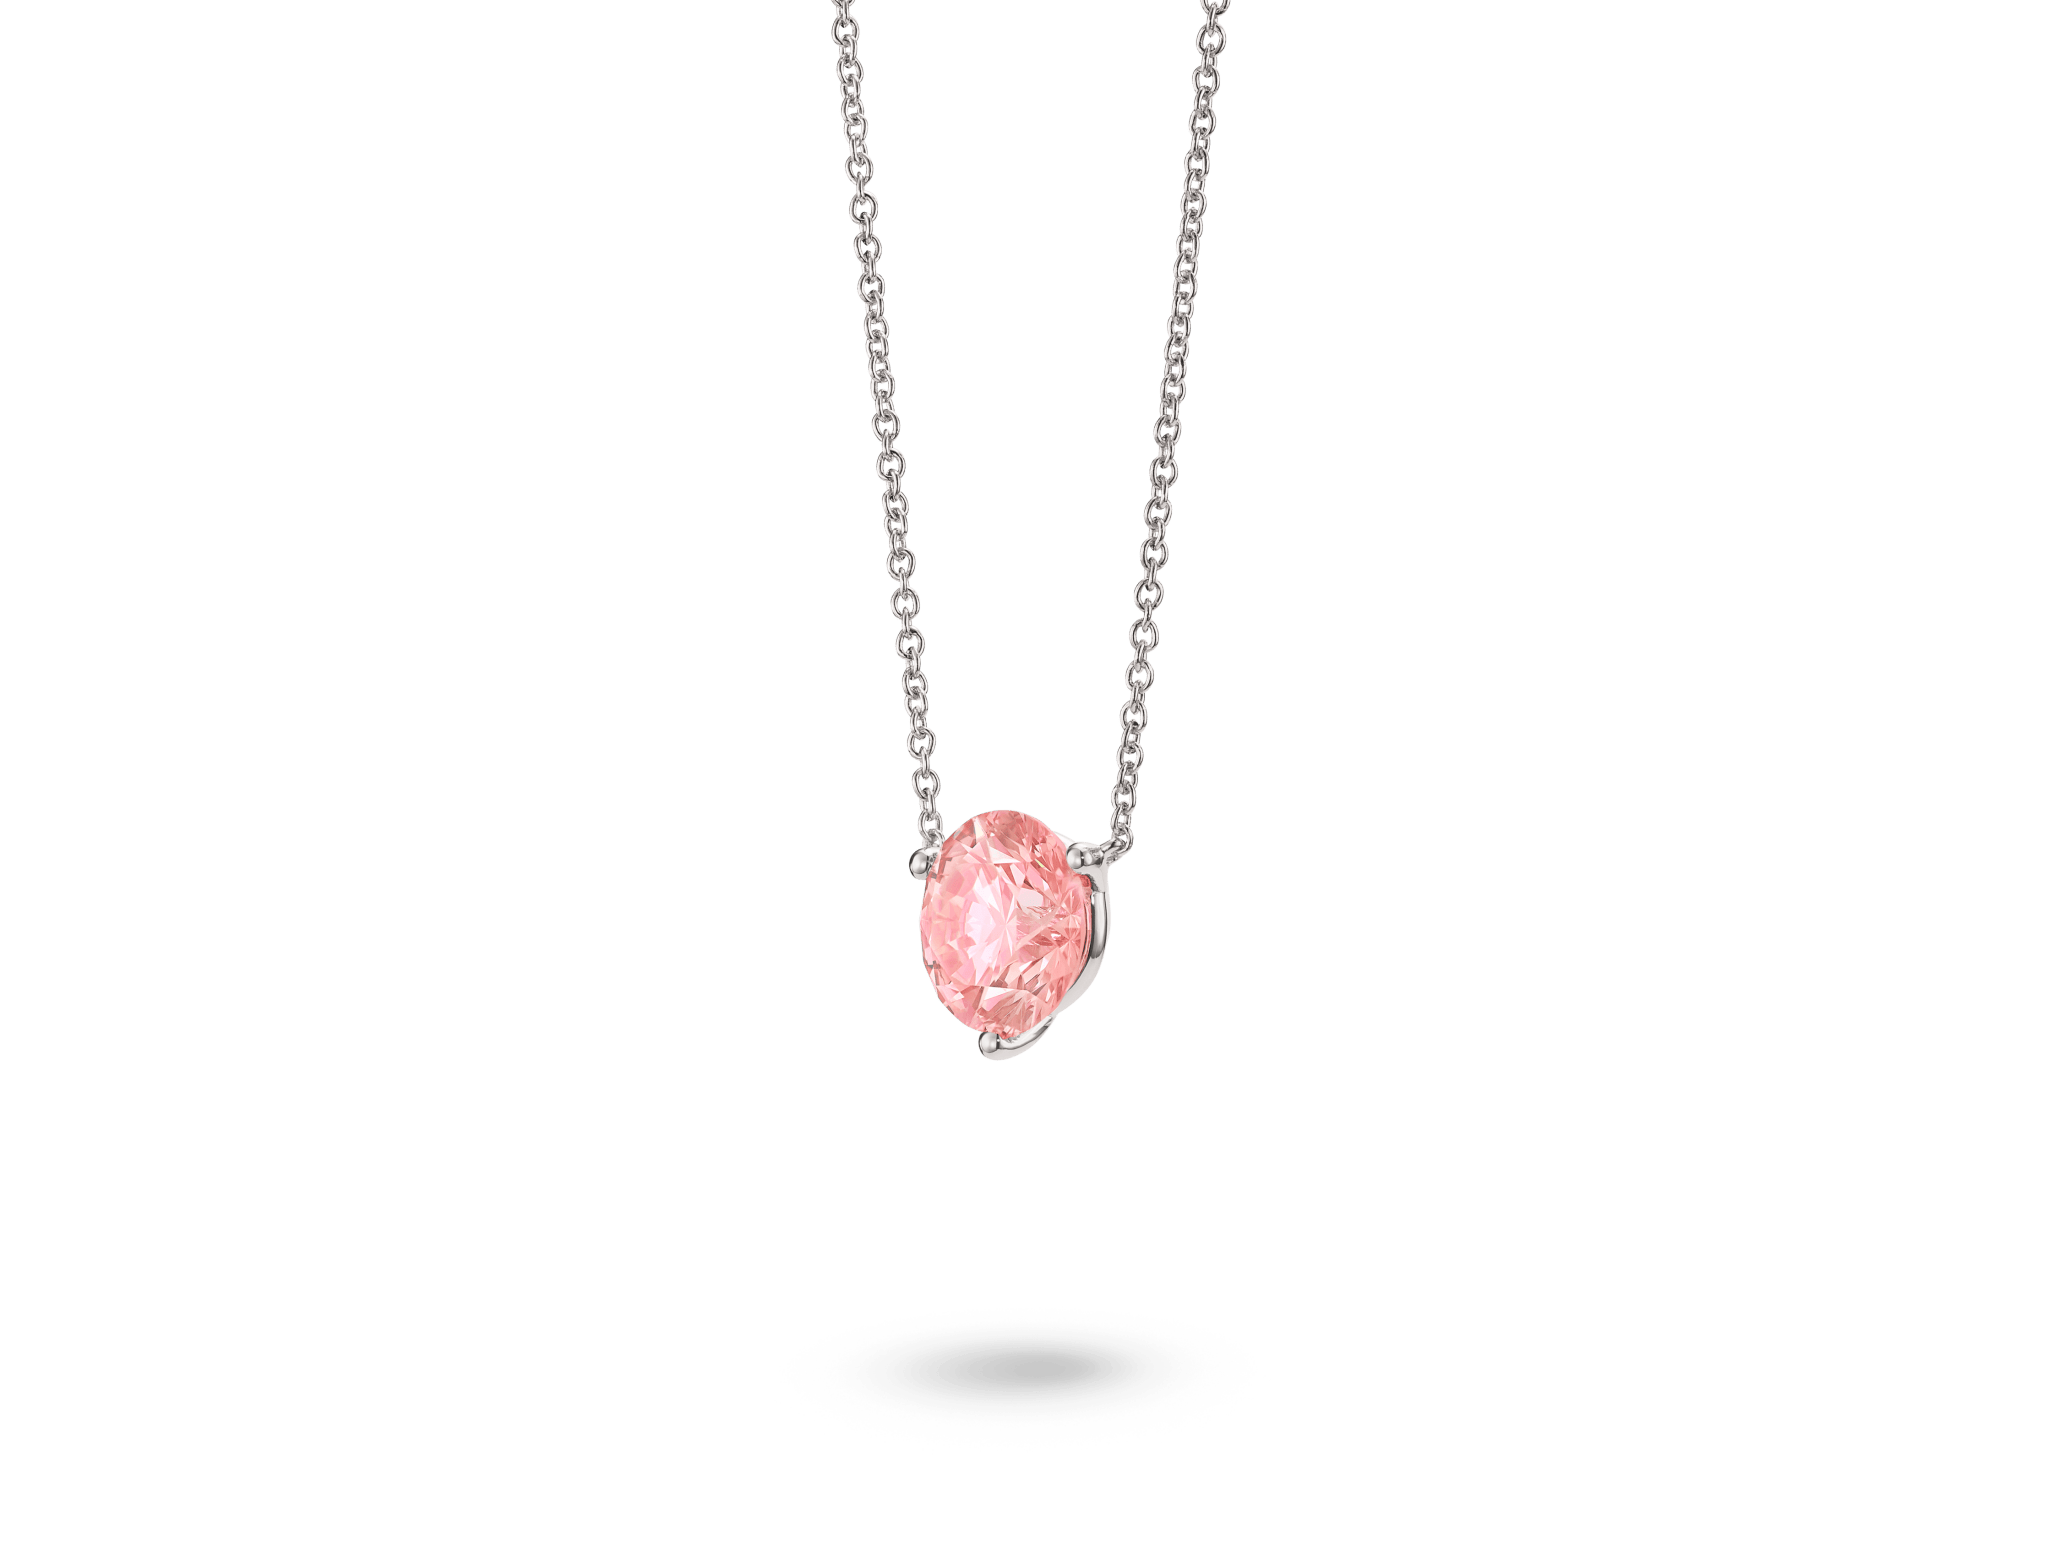 Lightbox Jewelry - NEW IN: Pierced lab-grown diamond necklace in 1 carat  total weight and 1/2 carat total weight and earrings in 1 carat total  weight. See the sparkle here: https://bit.ly/2FzEjTC #lightboxjewelry #